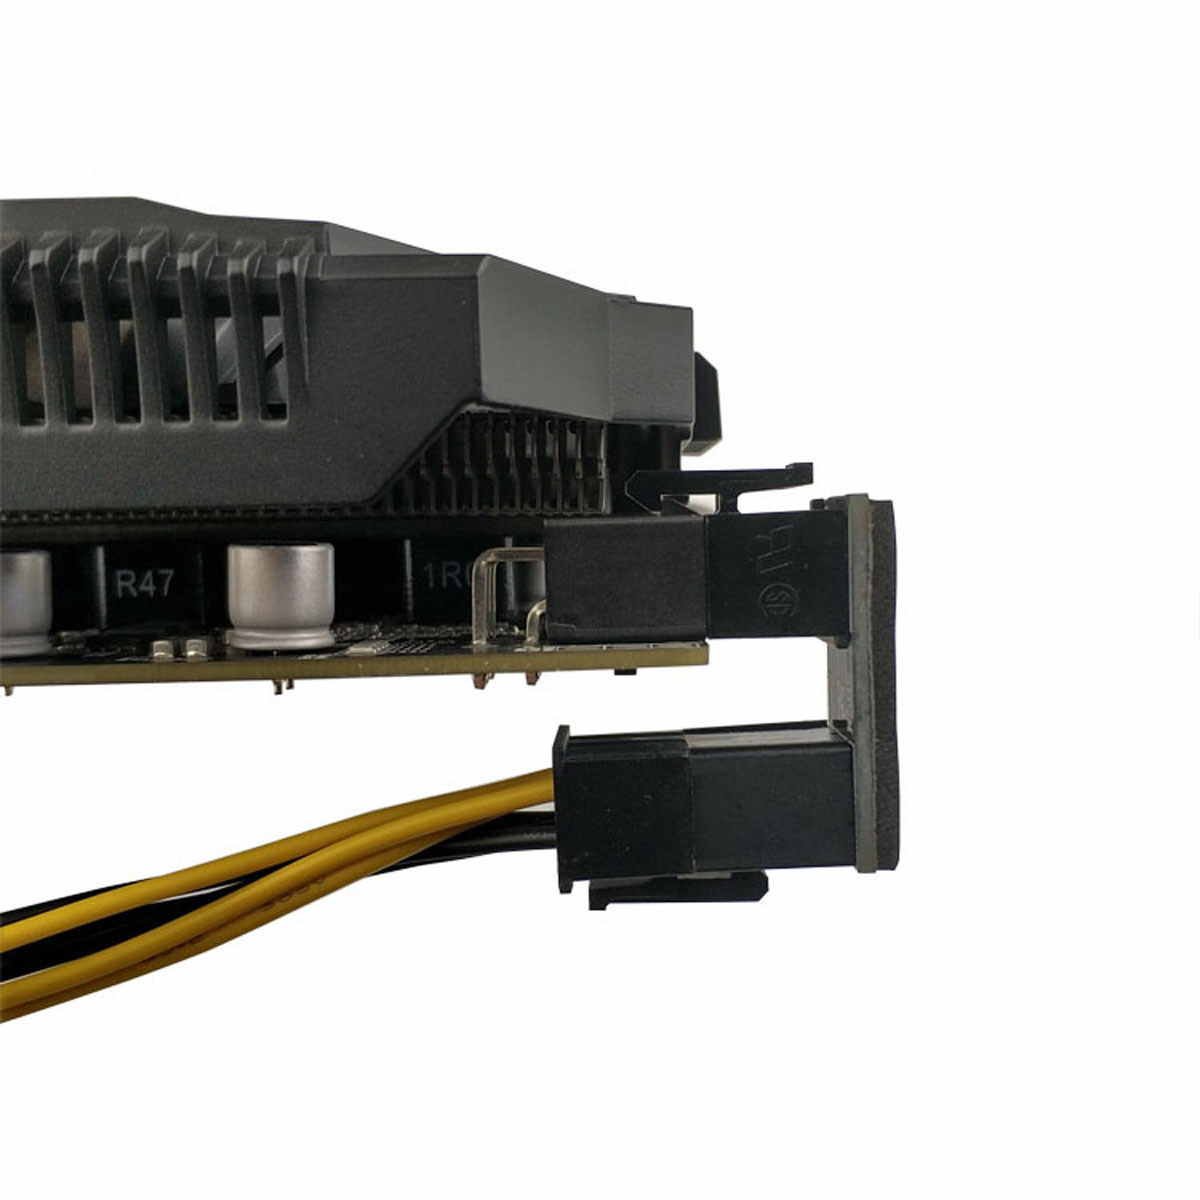 A large marketing image providing additional information about the product GamerChief 8-Pin PCIe 90 Degree Adapter Black Type B - Additional alt info not provided